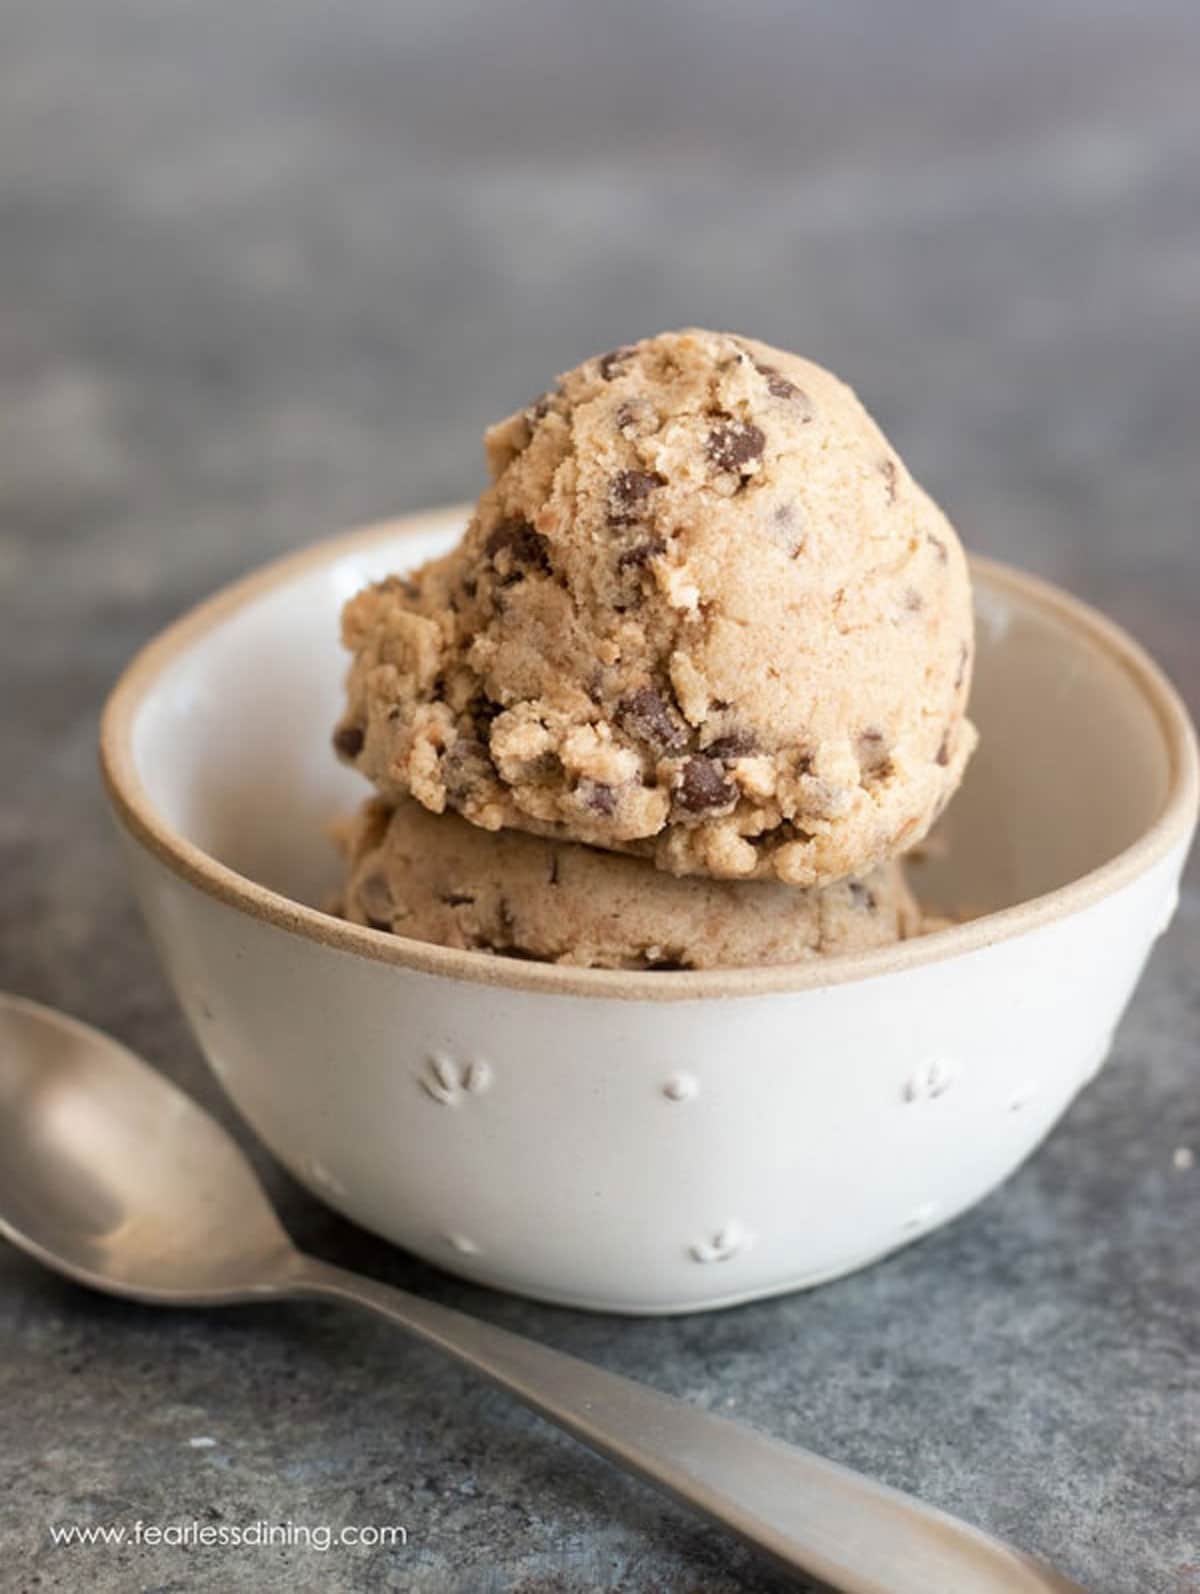 A bowl filled with scoops of edible cookie dough.